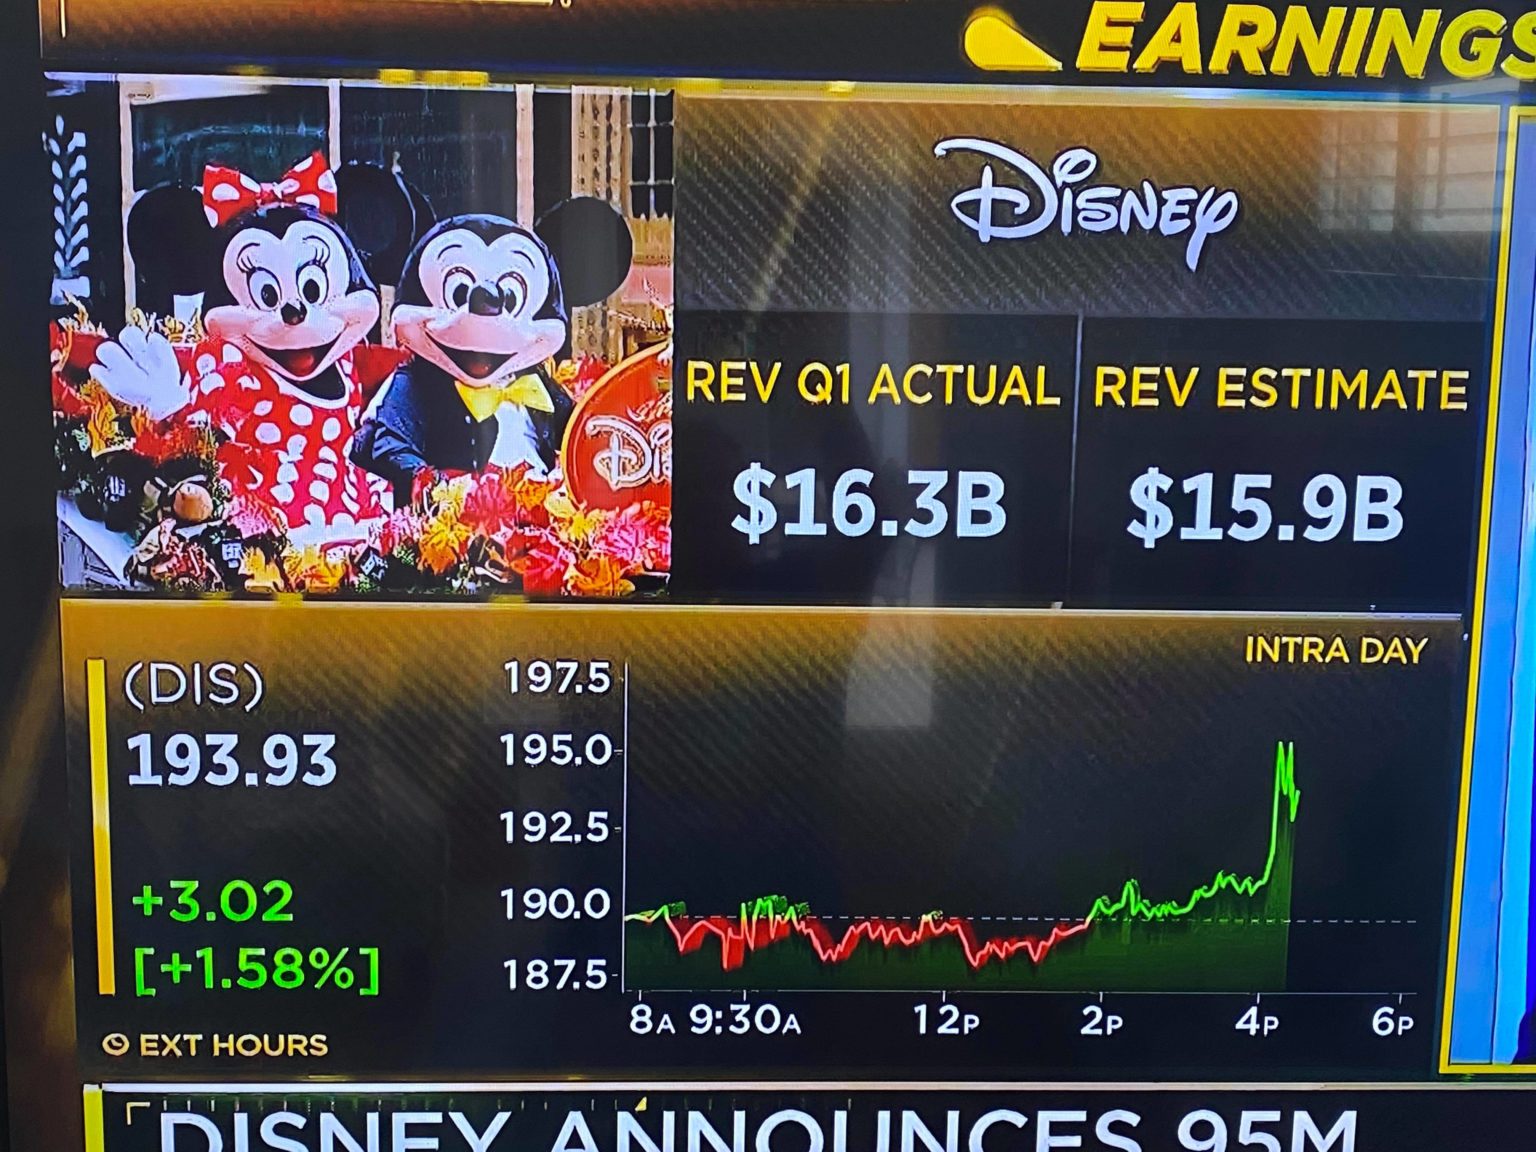 BREAKING NEWS Disney+ Subscribers Now at 95 Million According to